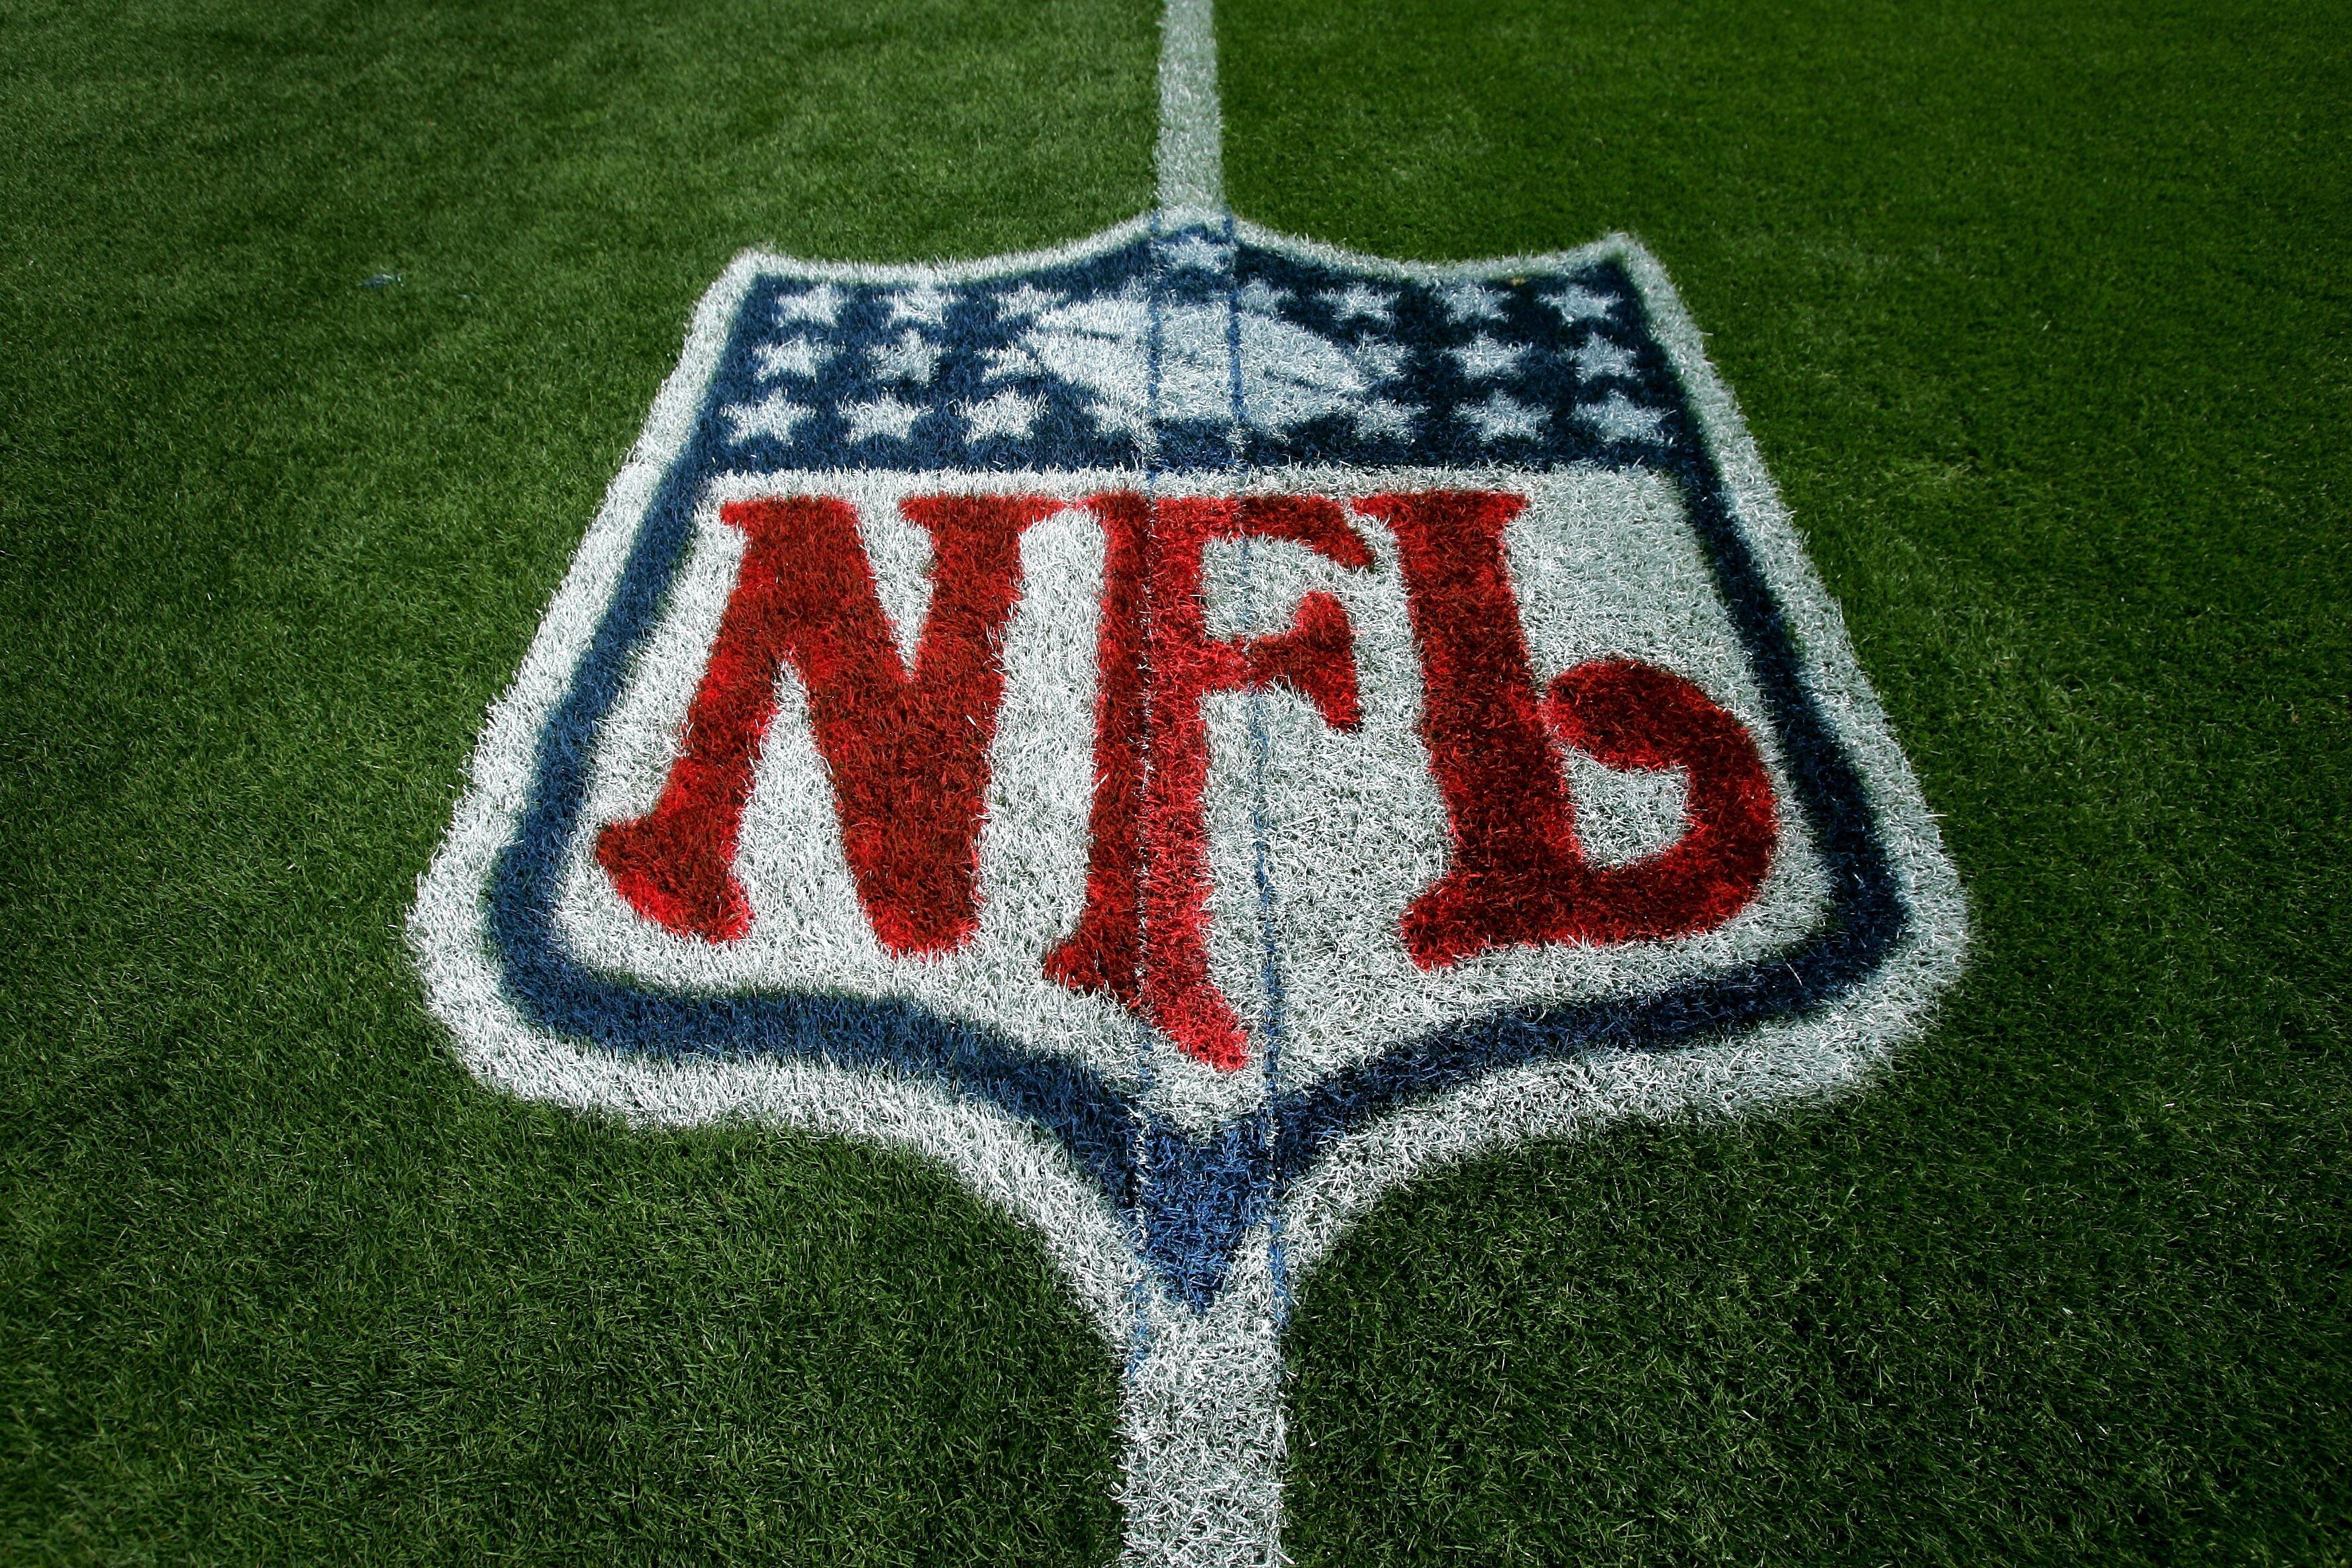 DENVER - SEPTEMBER 16:  The logo of the National Football League is painted on the field as the Oakland Raiders face the Denver Broncos during week two NFL action at Invesco Field at Mile High on September 16, 2007 in Denver, Colorado.  (Photo by Doug Pen